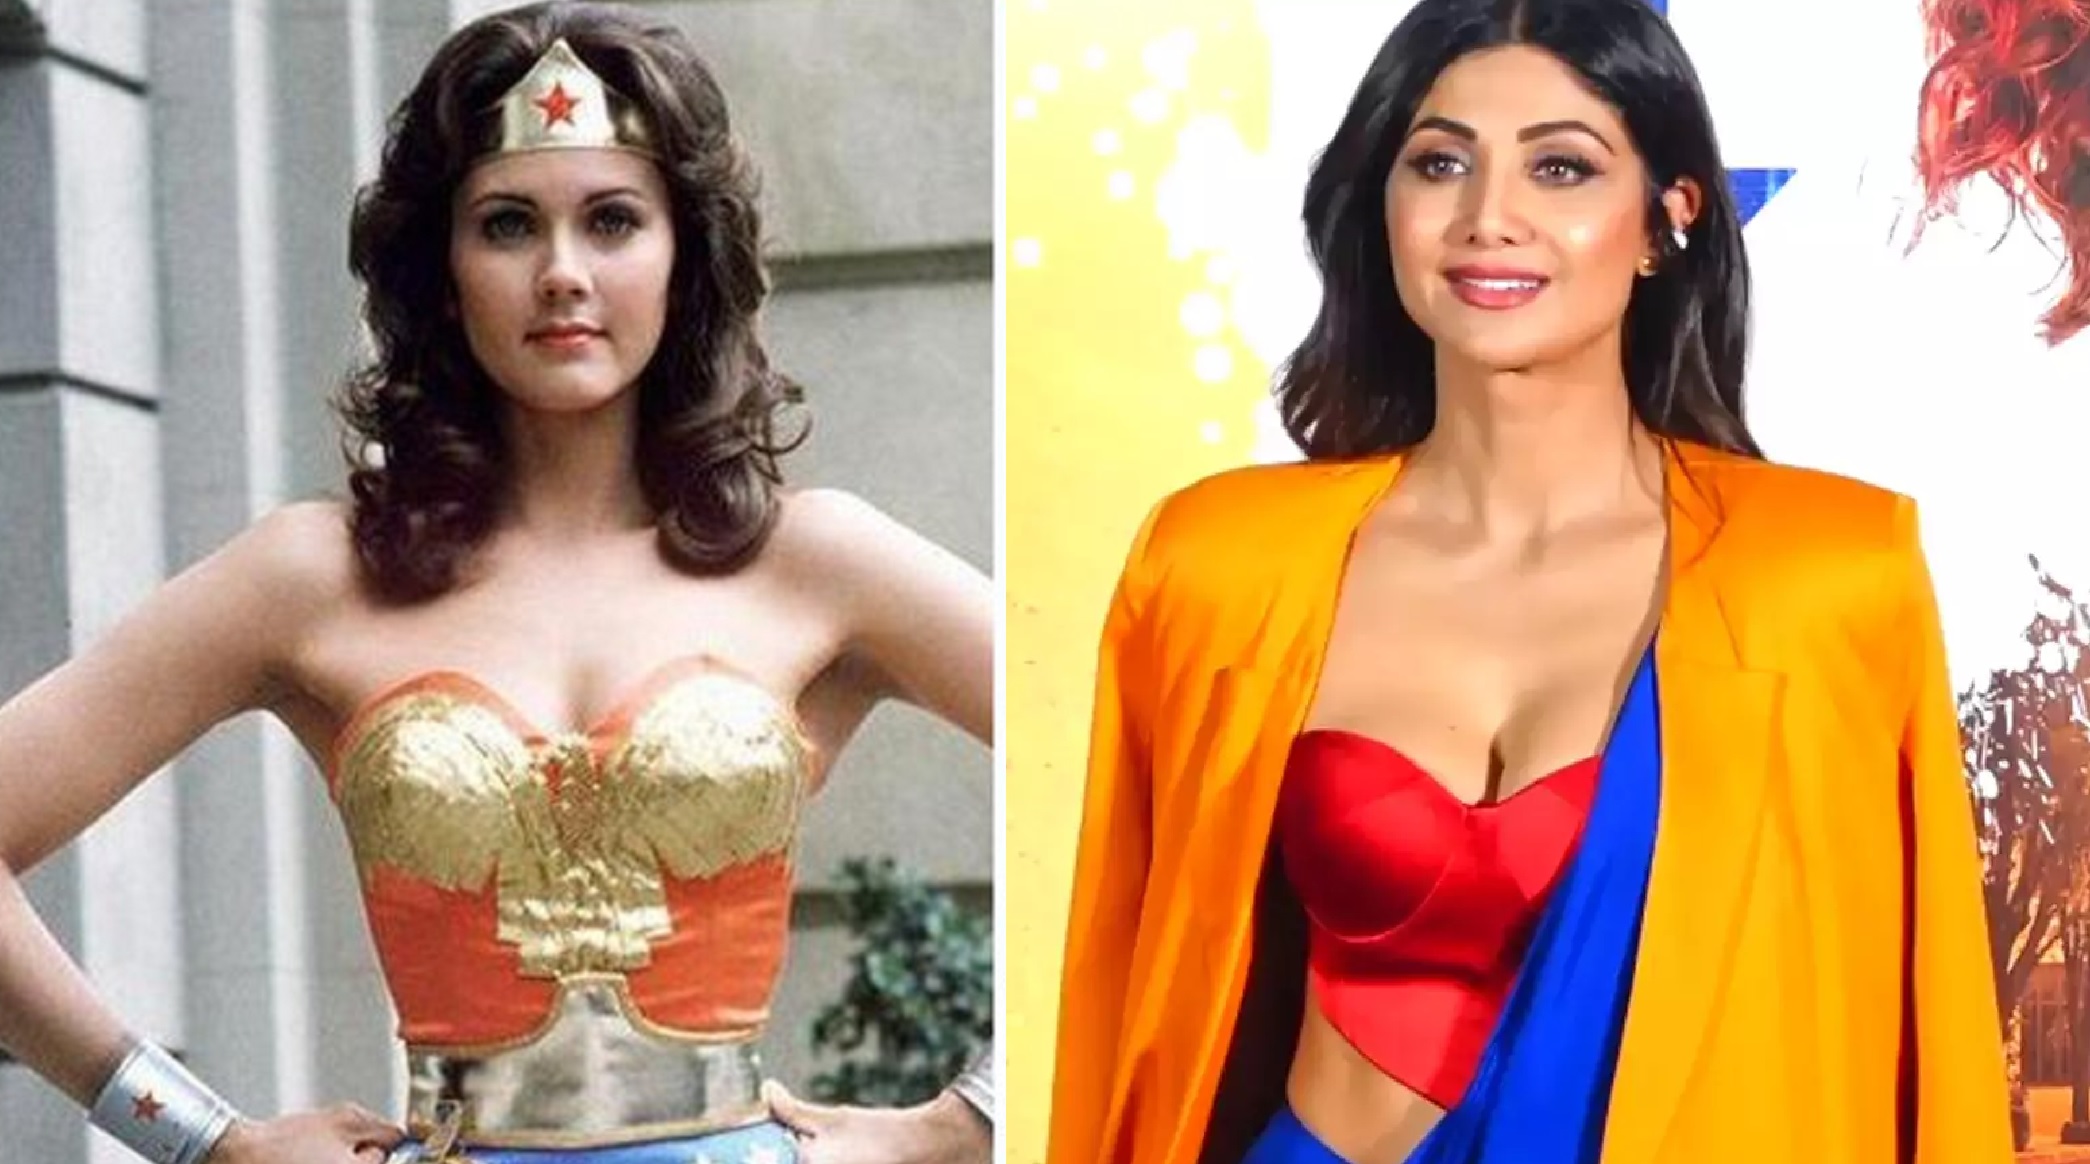 Shilpa Shetty Poses For Paparazzi In Wonder Women-Inspired Blouse During Trailer Launch Of New Film ‘Nikamma’